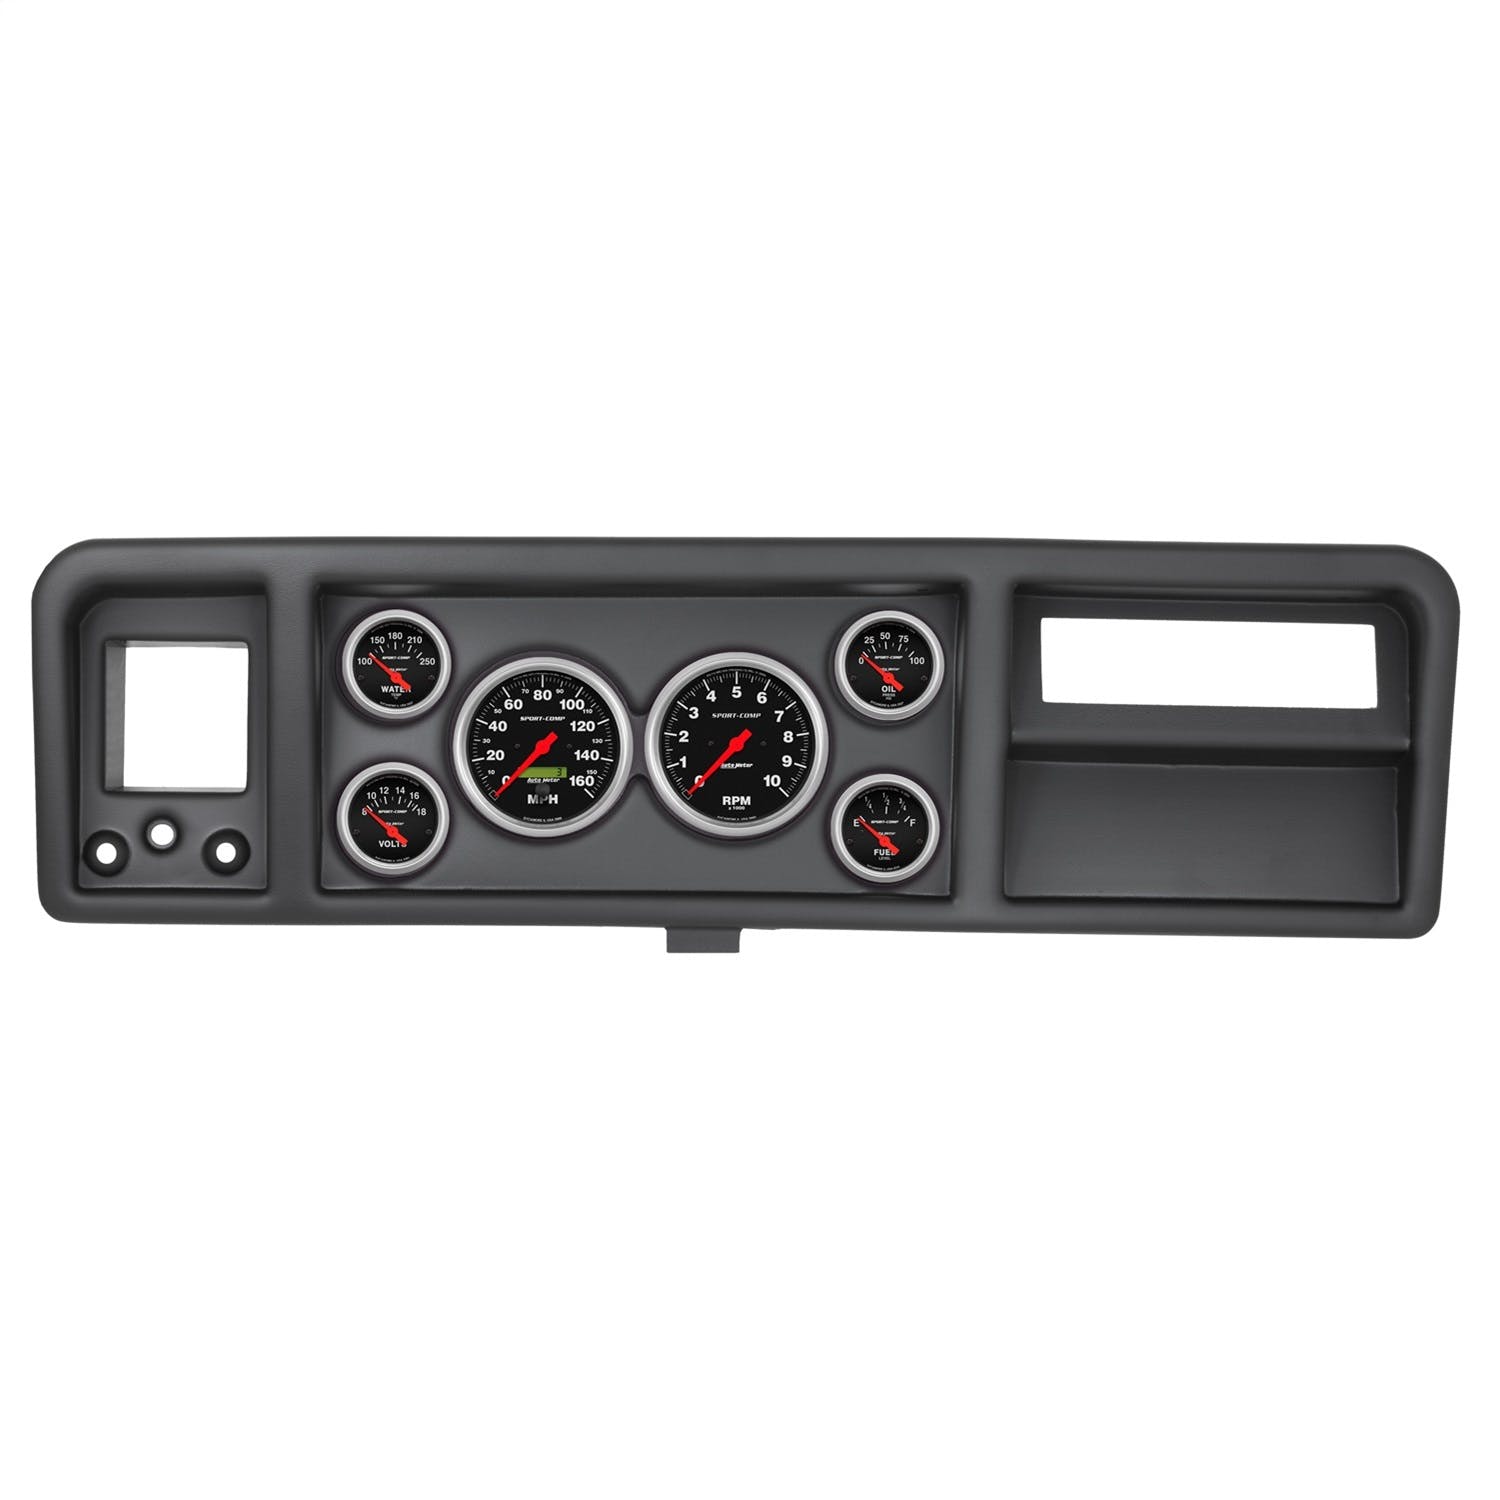 AutoMeter Products 2146-11 6 Gauge Direct-Fit Dash Kit, Ford Truck 73-79, Sport-Comp